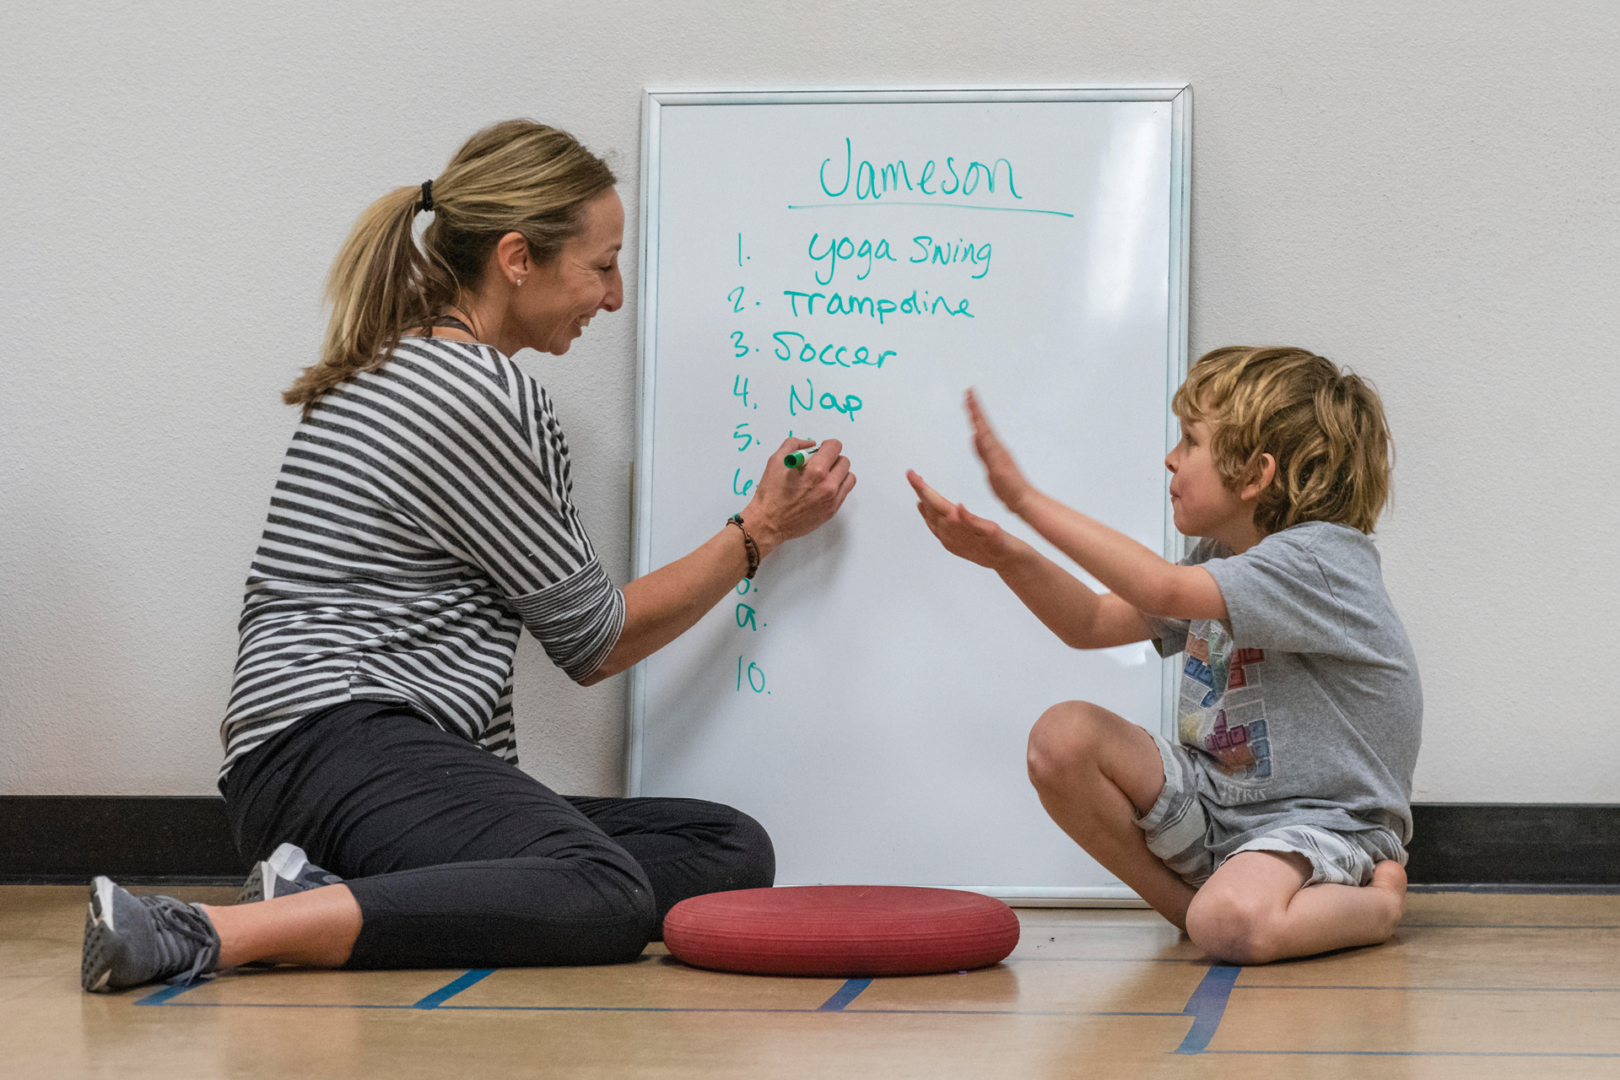 A clinician and a boy make a list of activities to do in the autism clinic, such as yoga swing, trampoline, soccer, and nap.